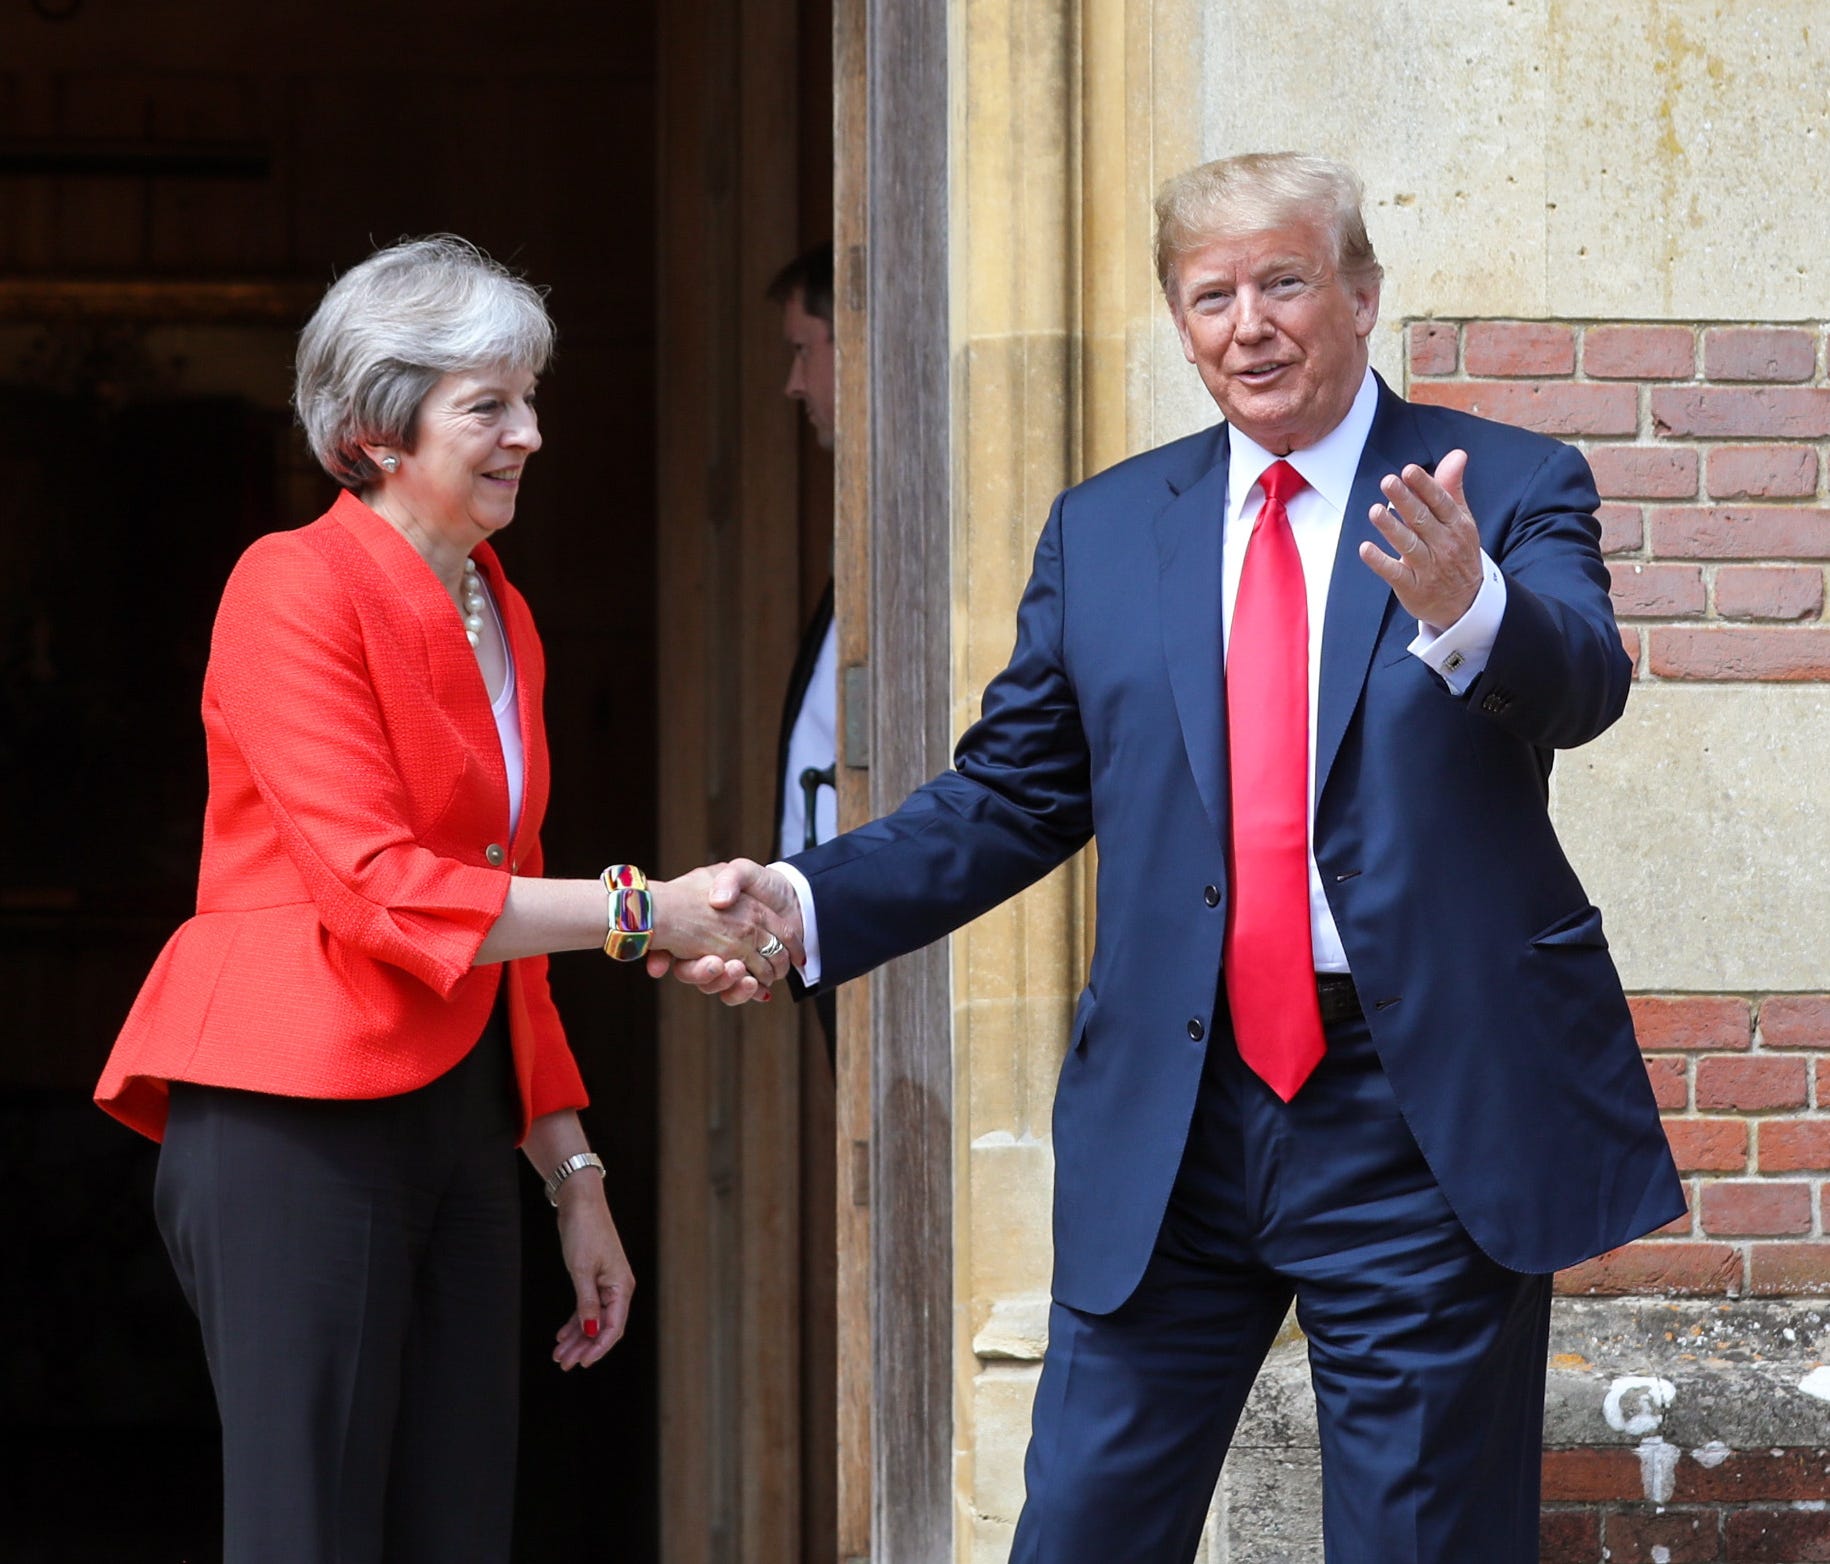 British Prime Minister Theresa May shakes hands with President Donald Trump as he arrives for their bilateral meeting at Chequers, England,